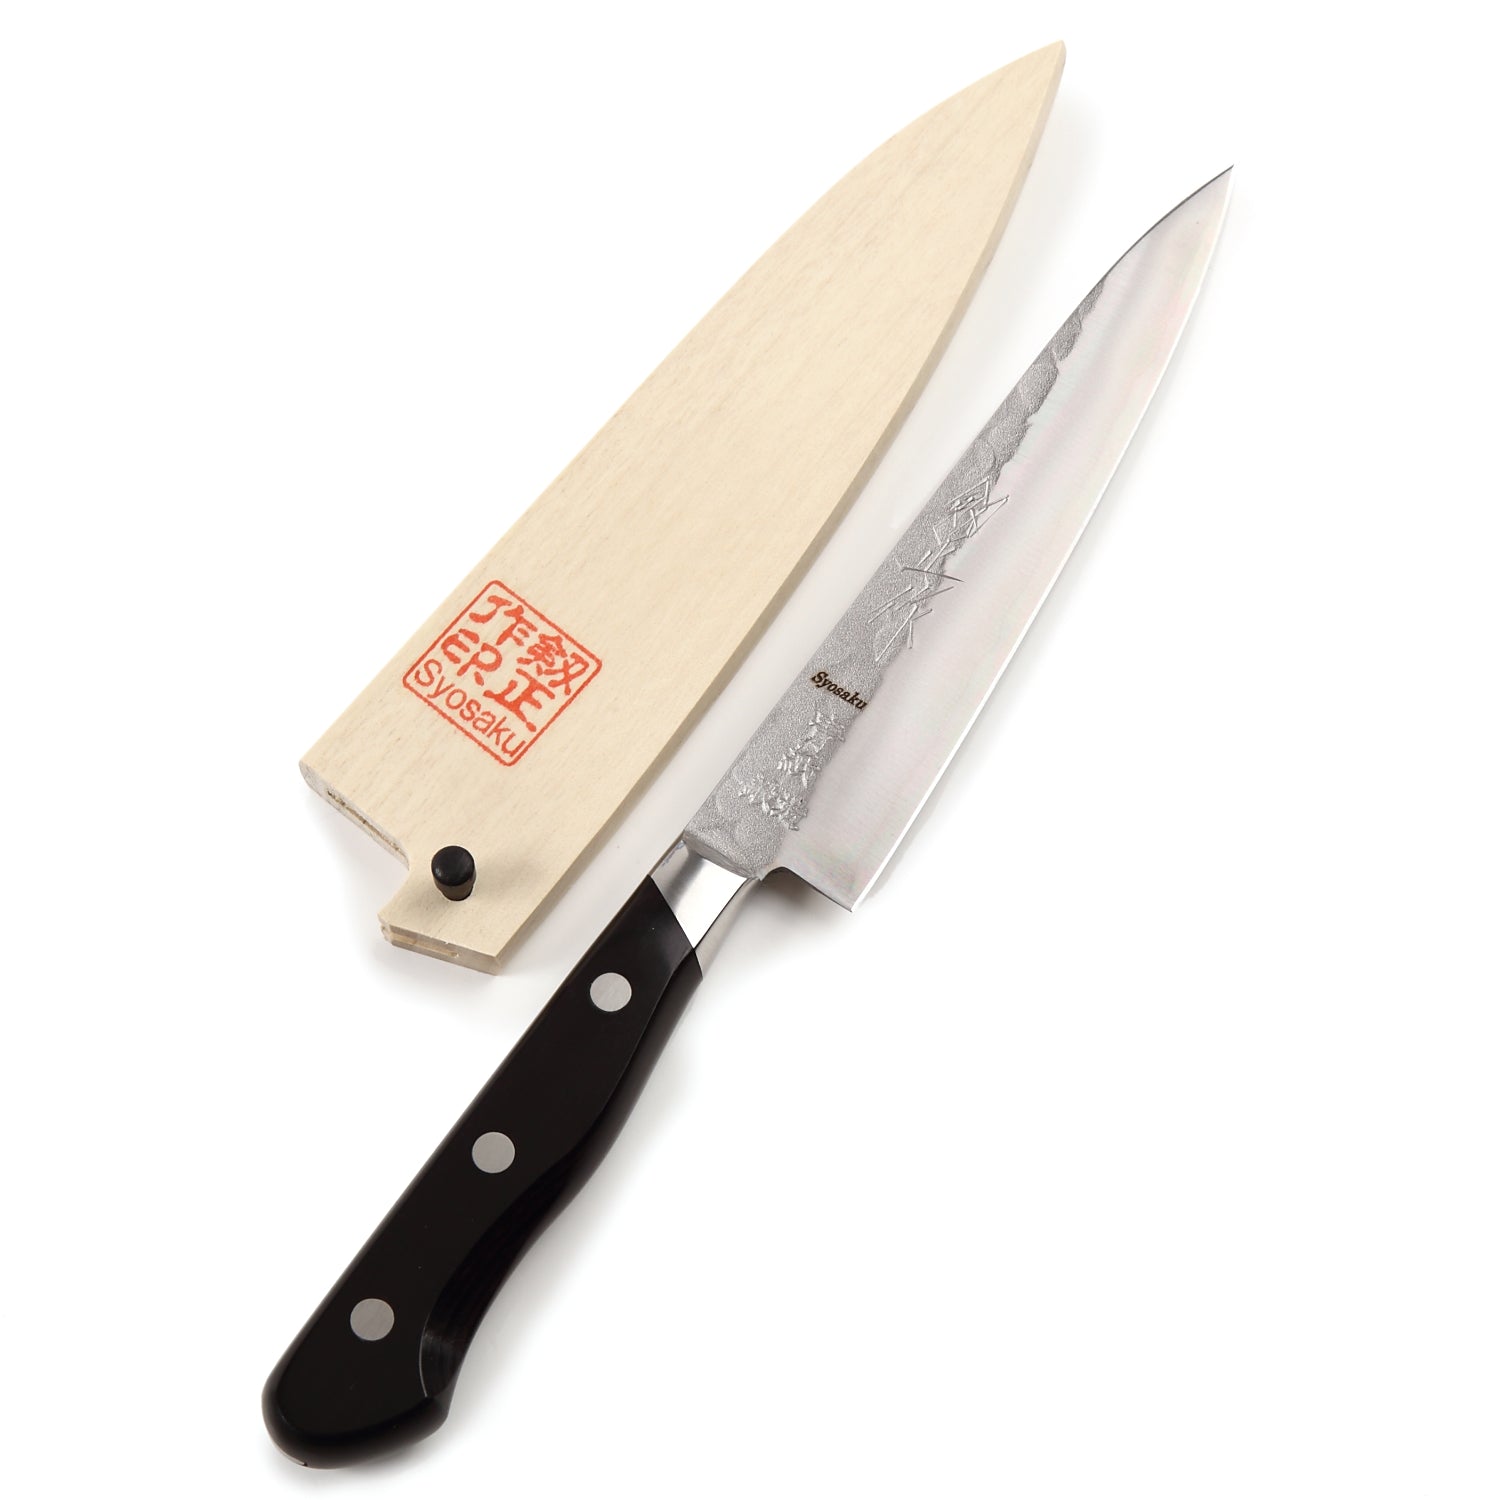 The 9 Best Petty and Kitchen Utility Knives Reviewed in 2020